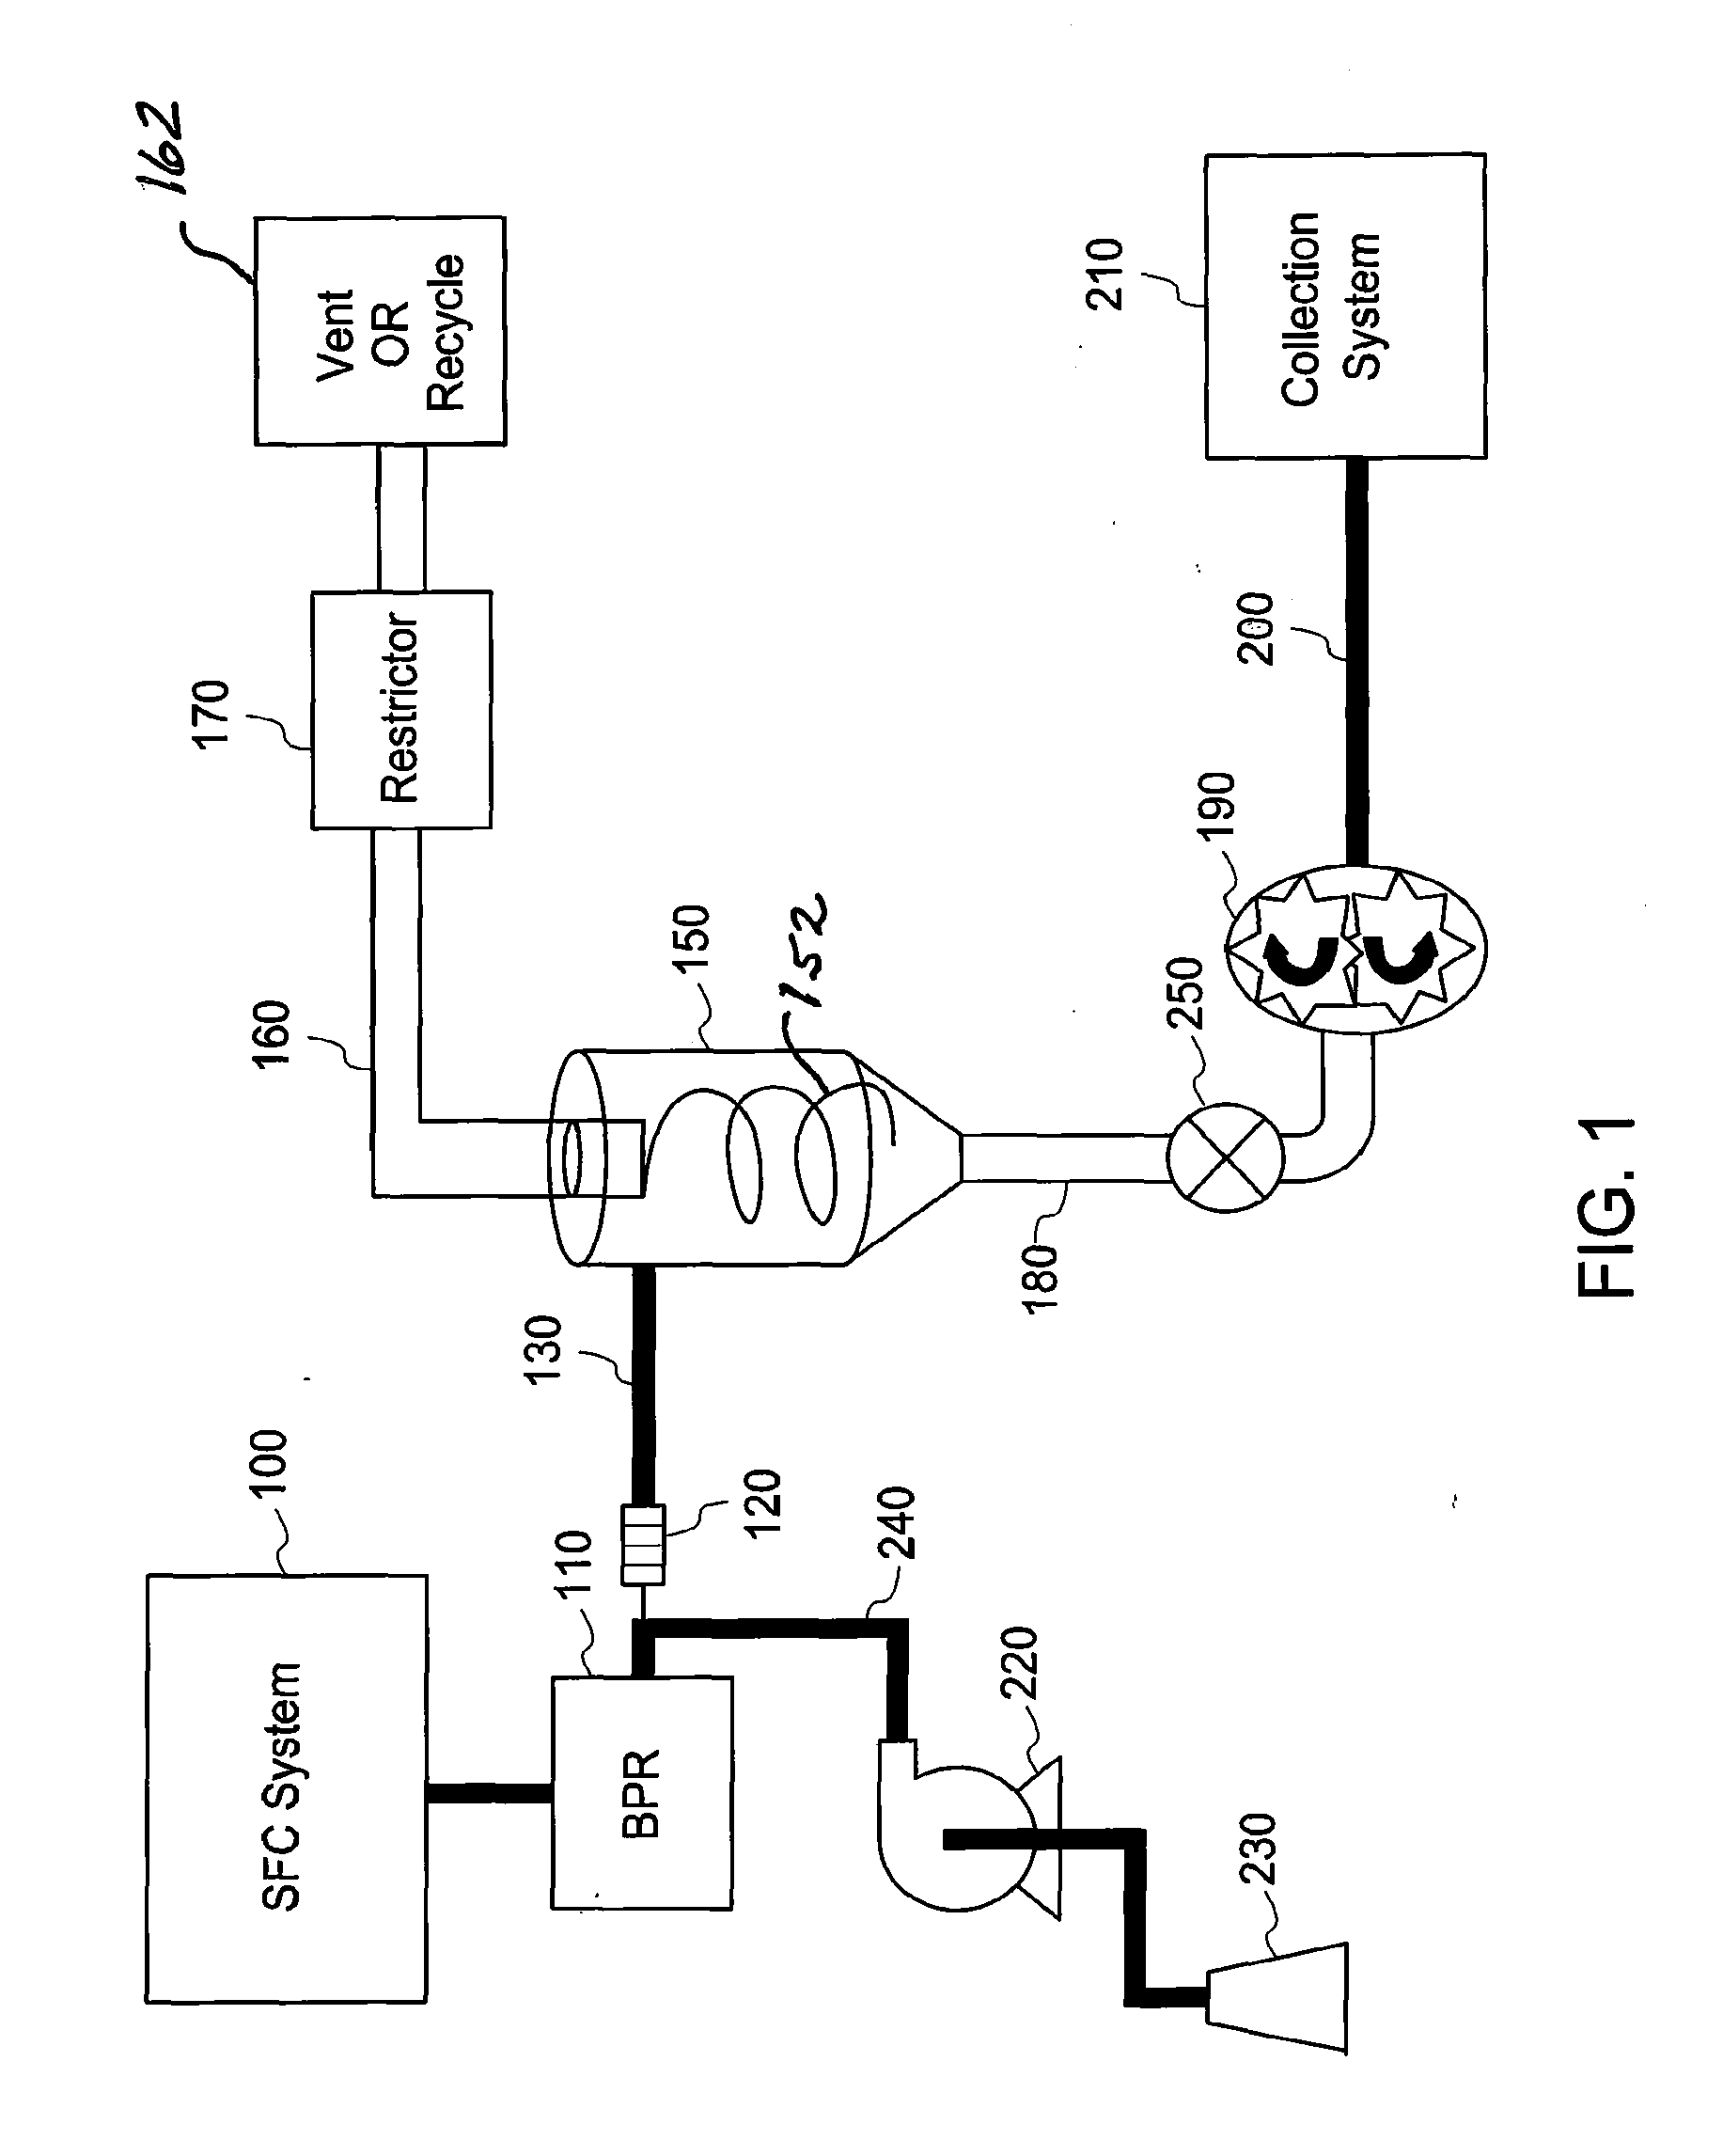 System and process for an active drain for gas-liquid separators